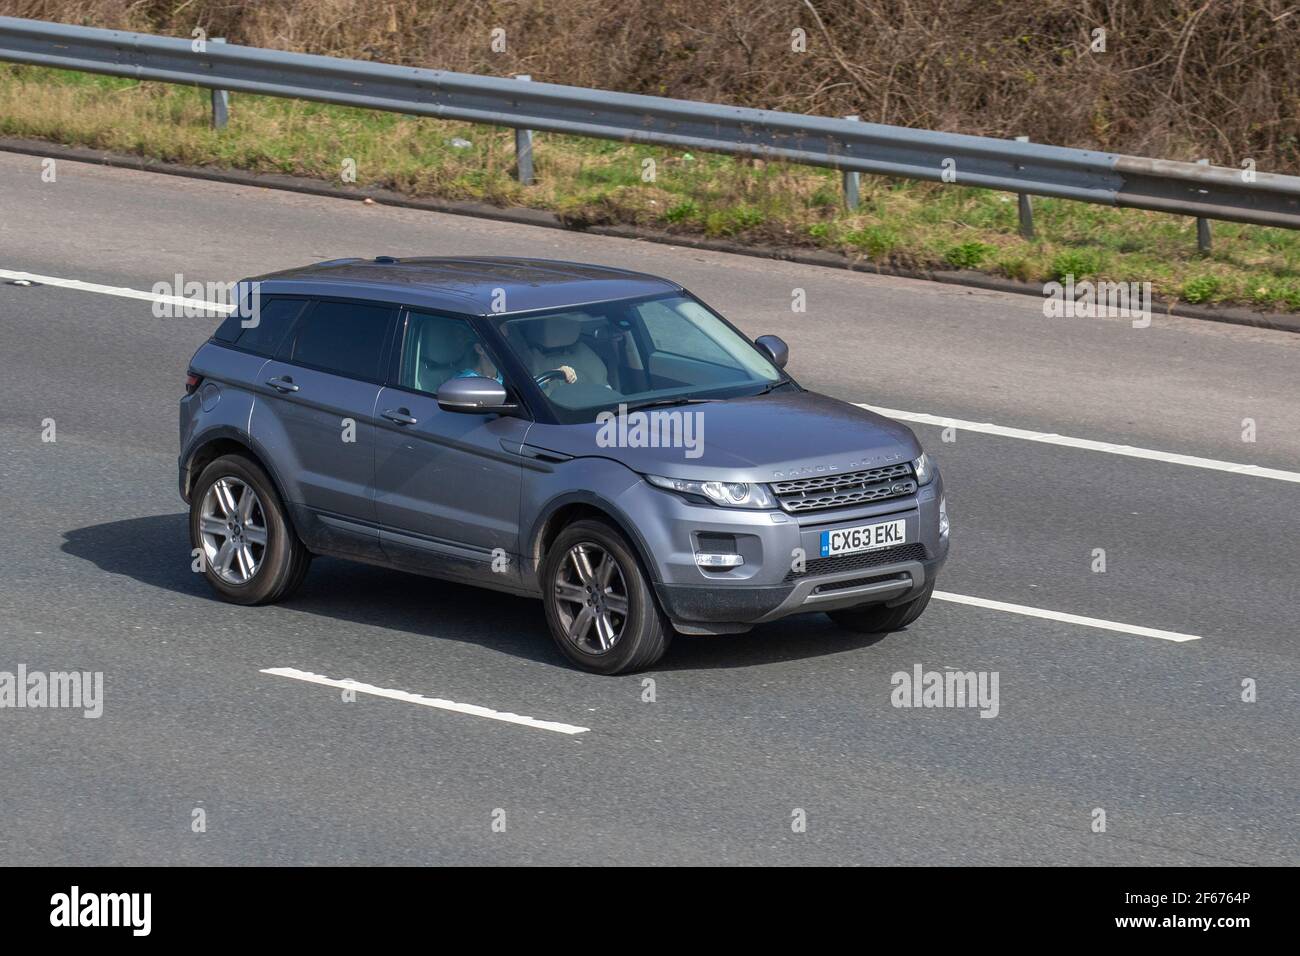 2013 63 plate Land Range Rover Evoque Pure T Sd4 2179cc diesel SUV; Vehicular traffic, moving vehicles, cars, vehicle driving on UK roads, motors, motoring on the M6 highway English motorway road network Stock Photo